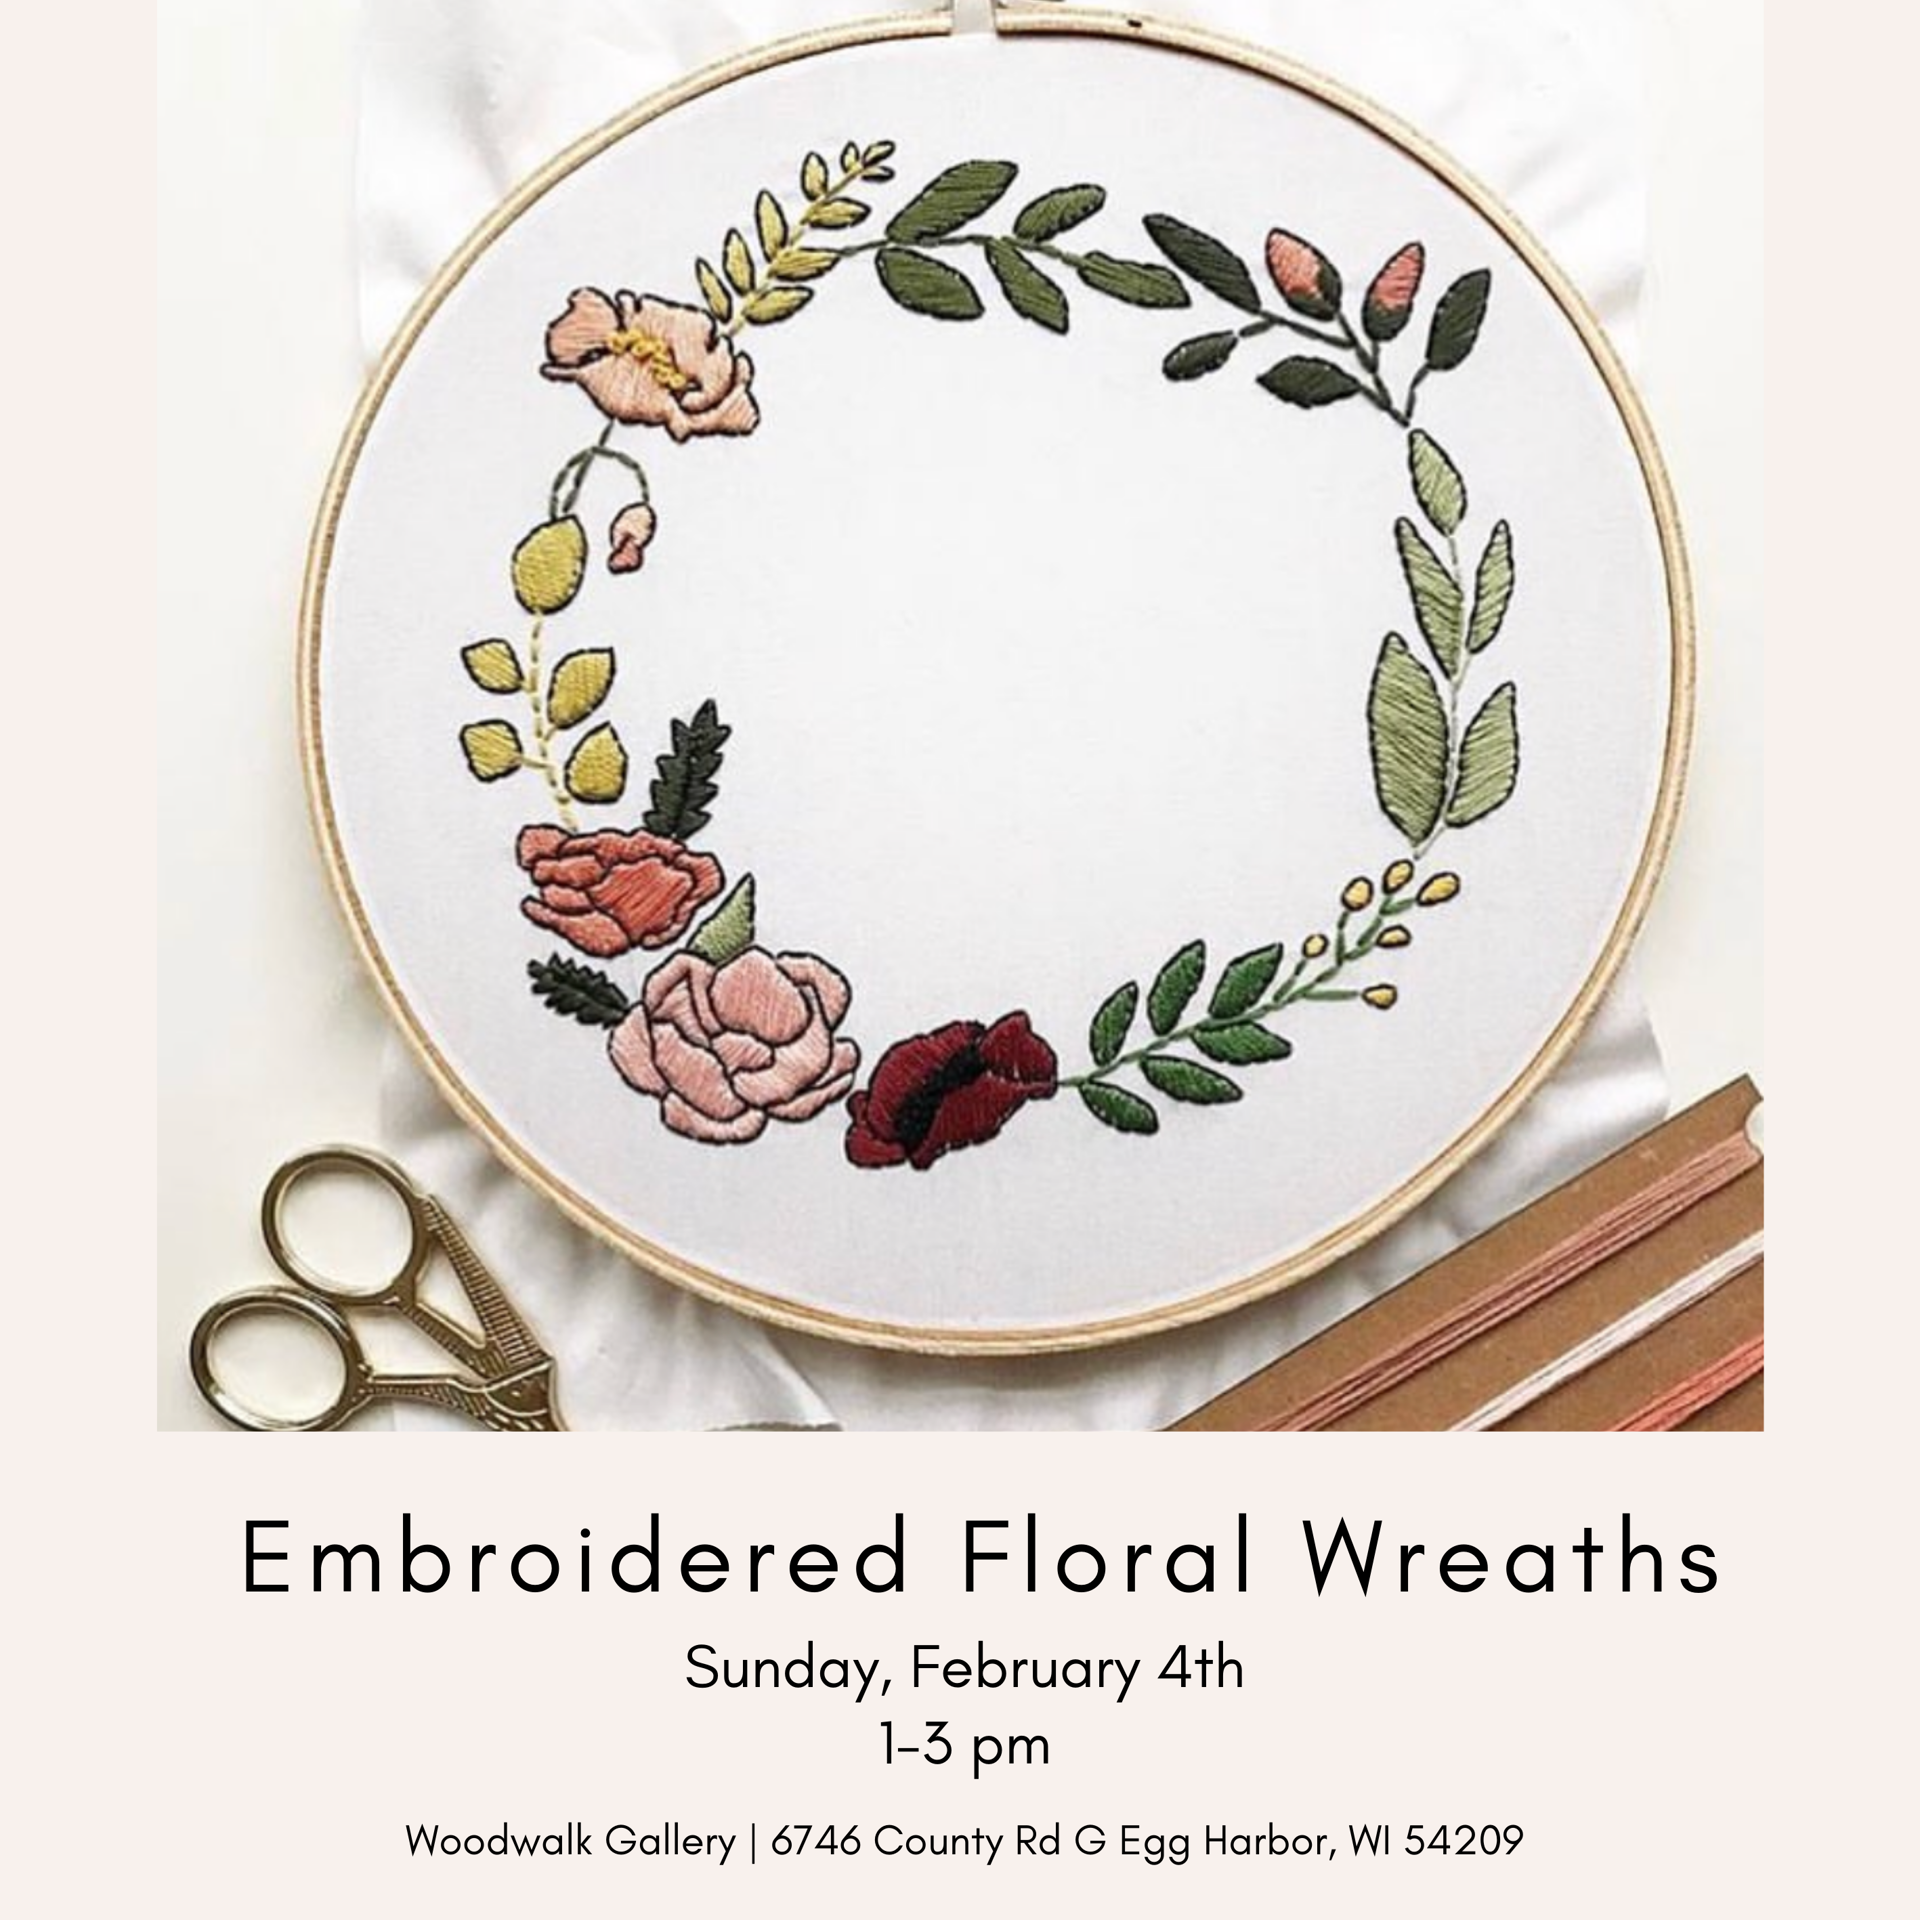 Embroidered Floral Wreaths